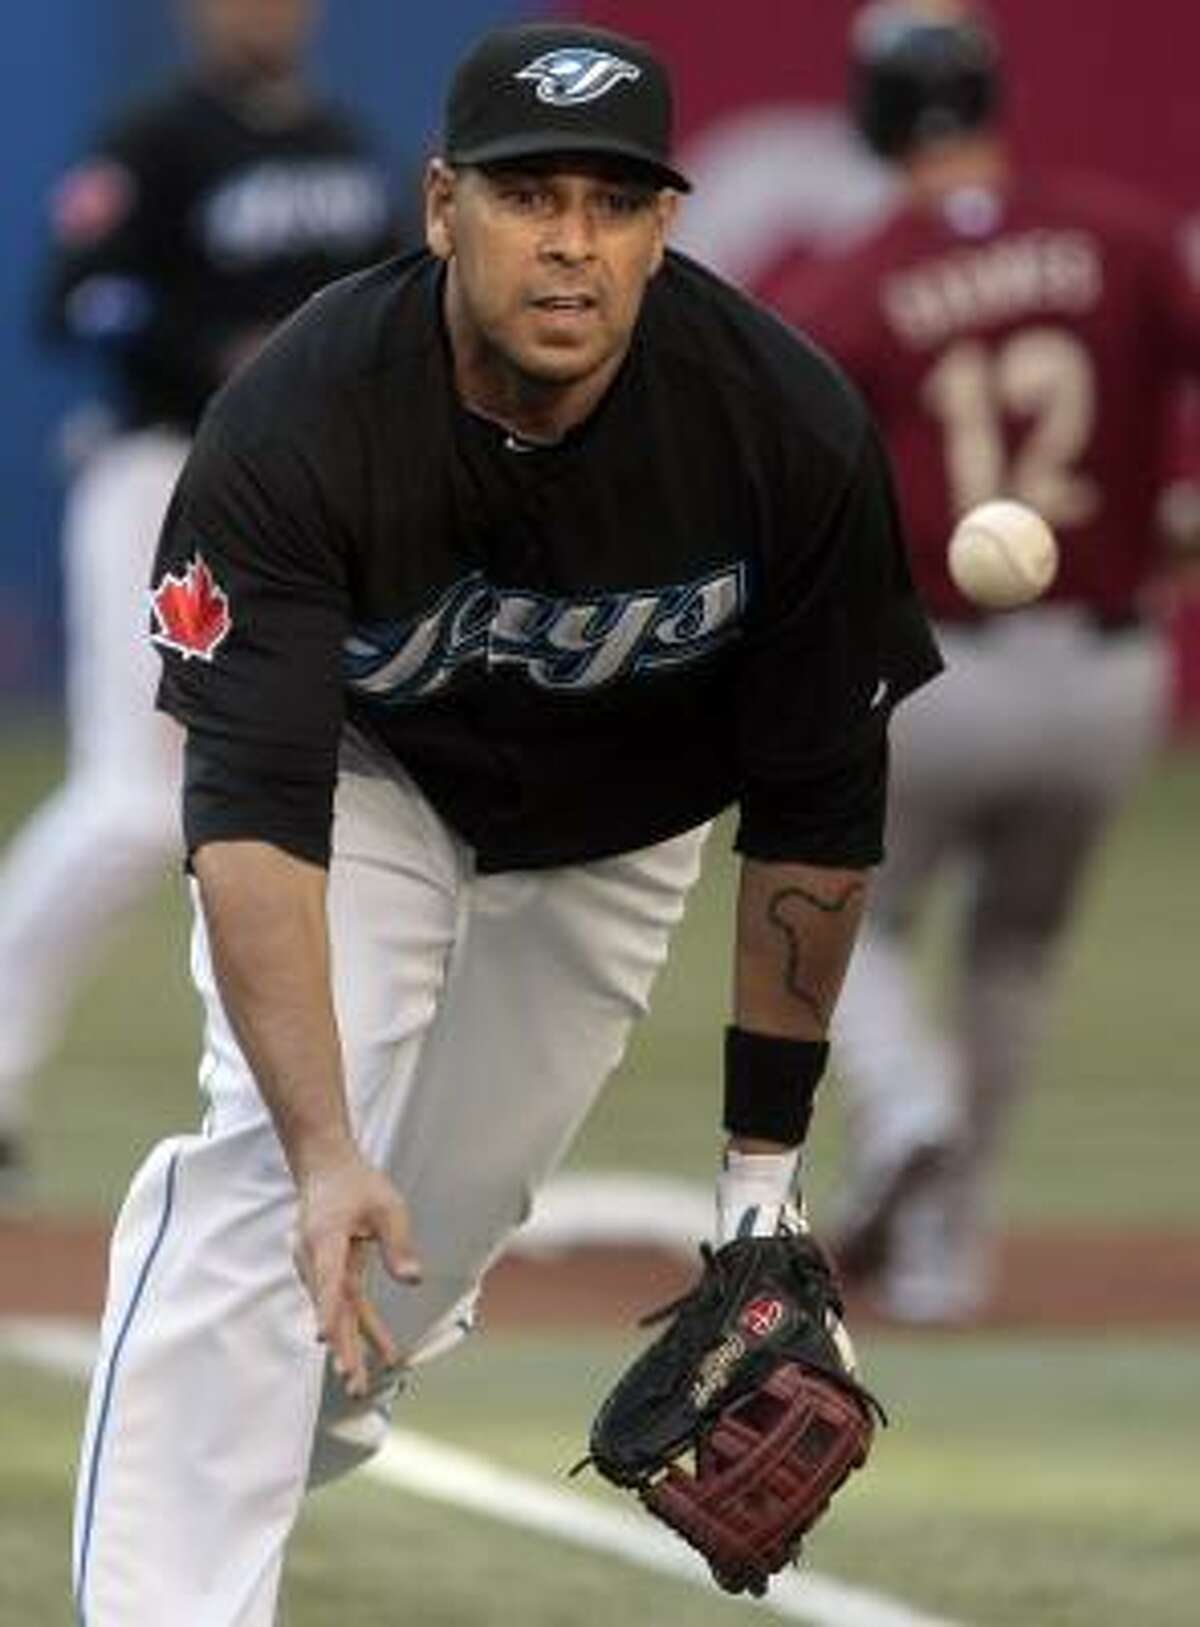 Blue Jays first baseman Juan Rivera makes a play for an out at first base.